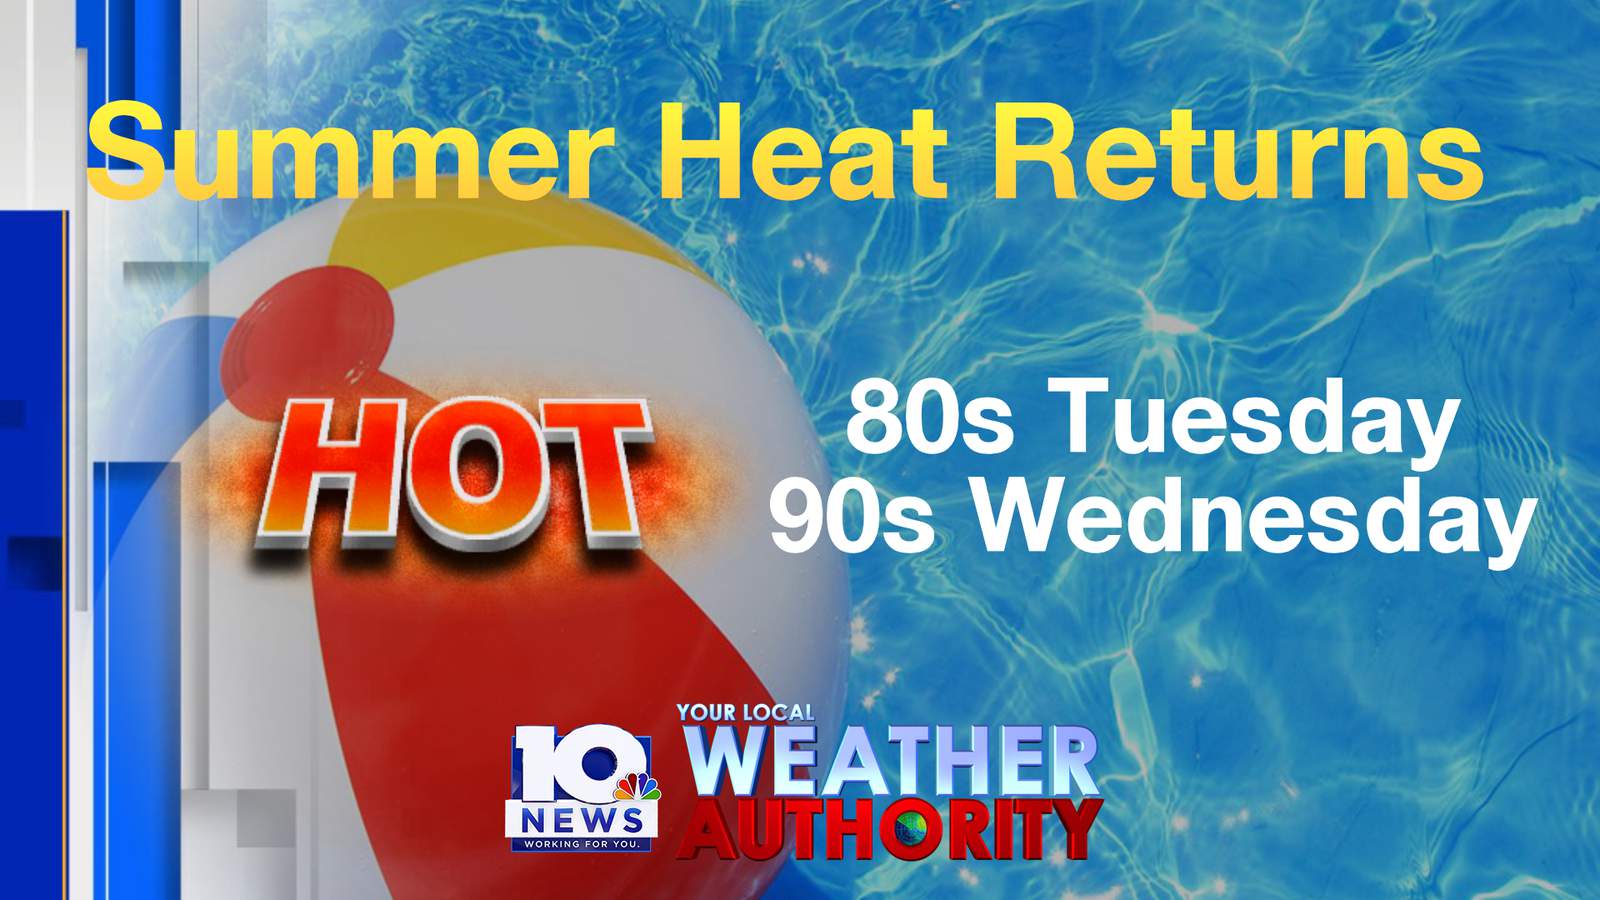 OH, HEY SUMMER! Temperatures, humidity levels, storm chances all climb this week